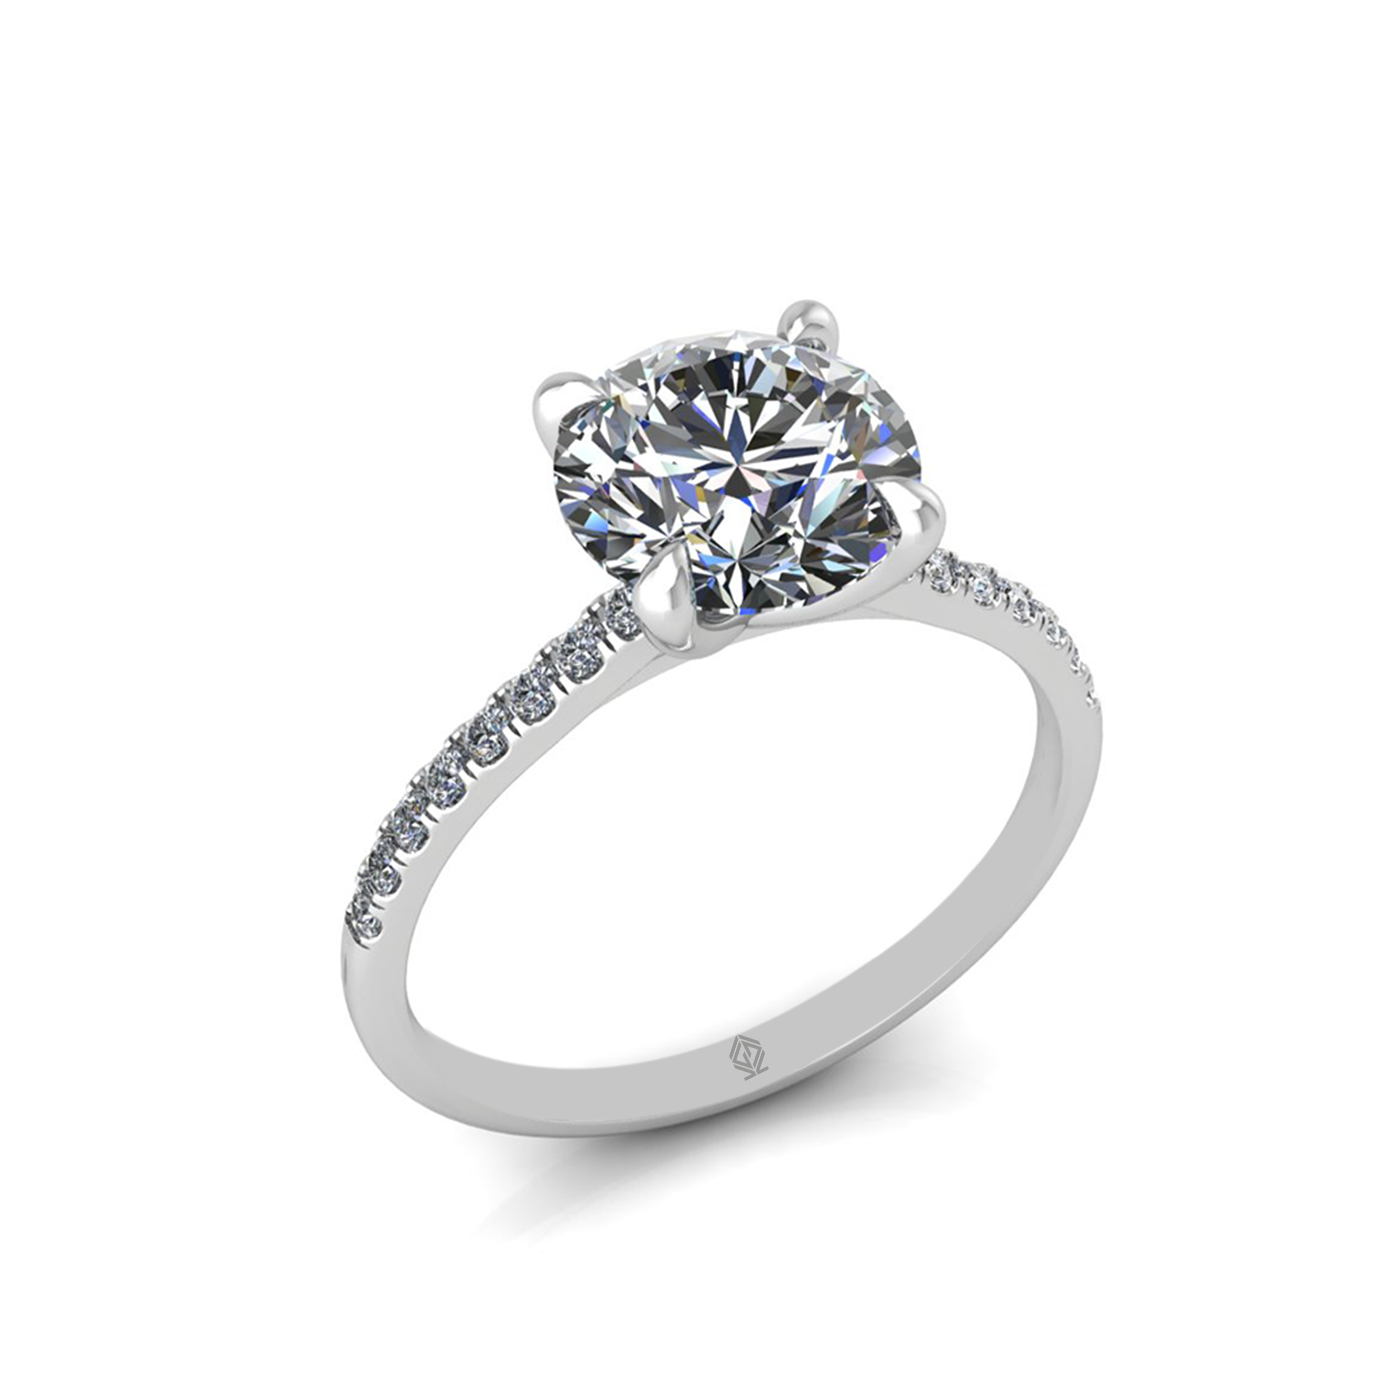 18k white gold 2.0ct 4 prongs round cut diamond engagement ring with whisper thin pavÉ set band